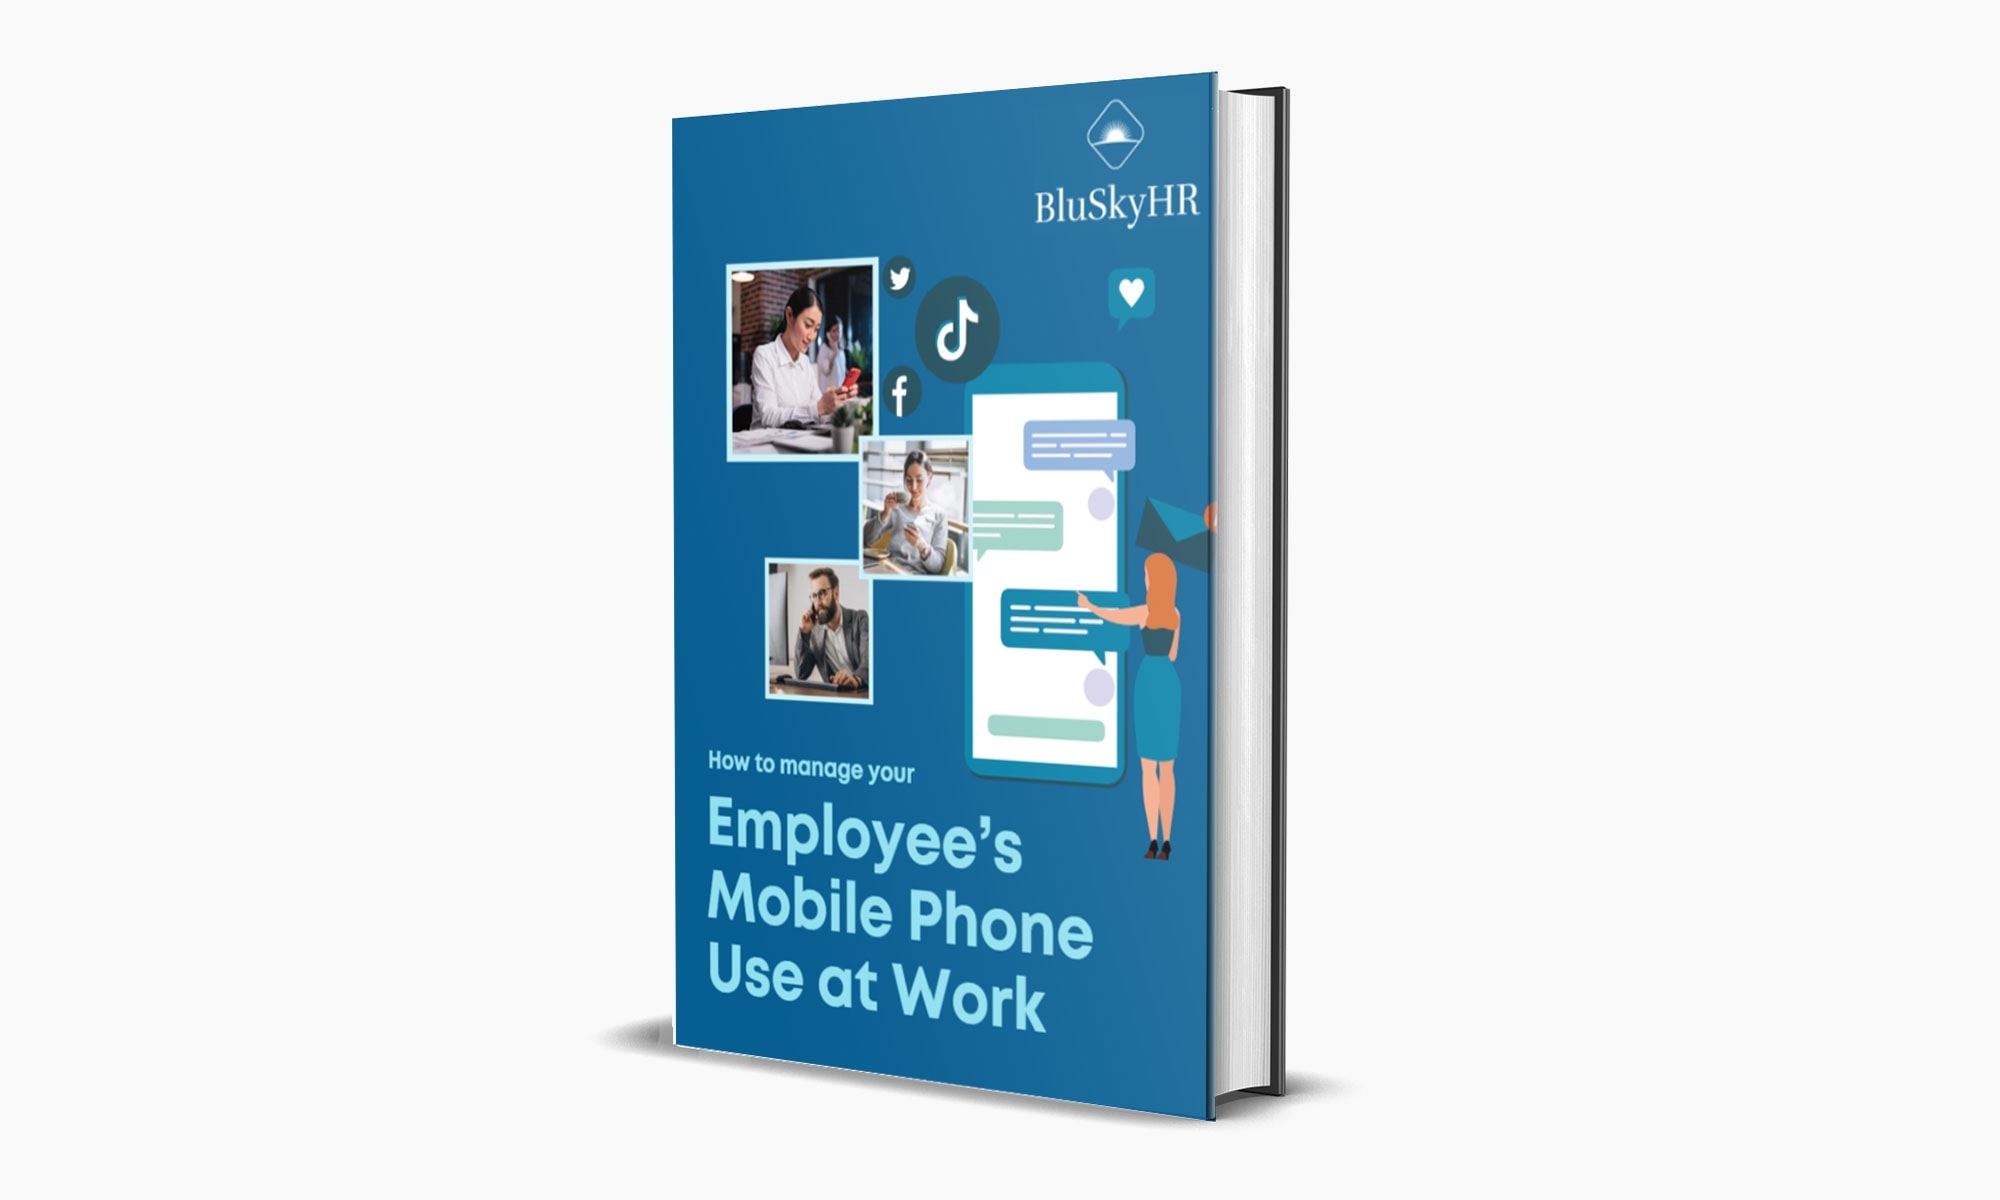 How to Manage Employee’s Mobile Phone Use at Work